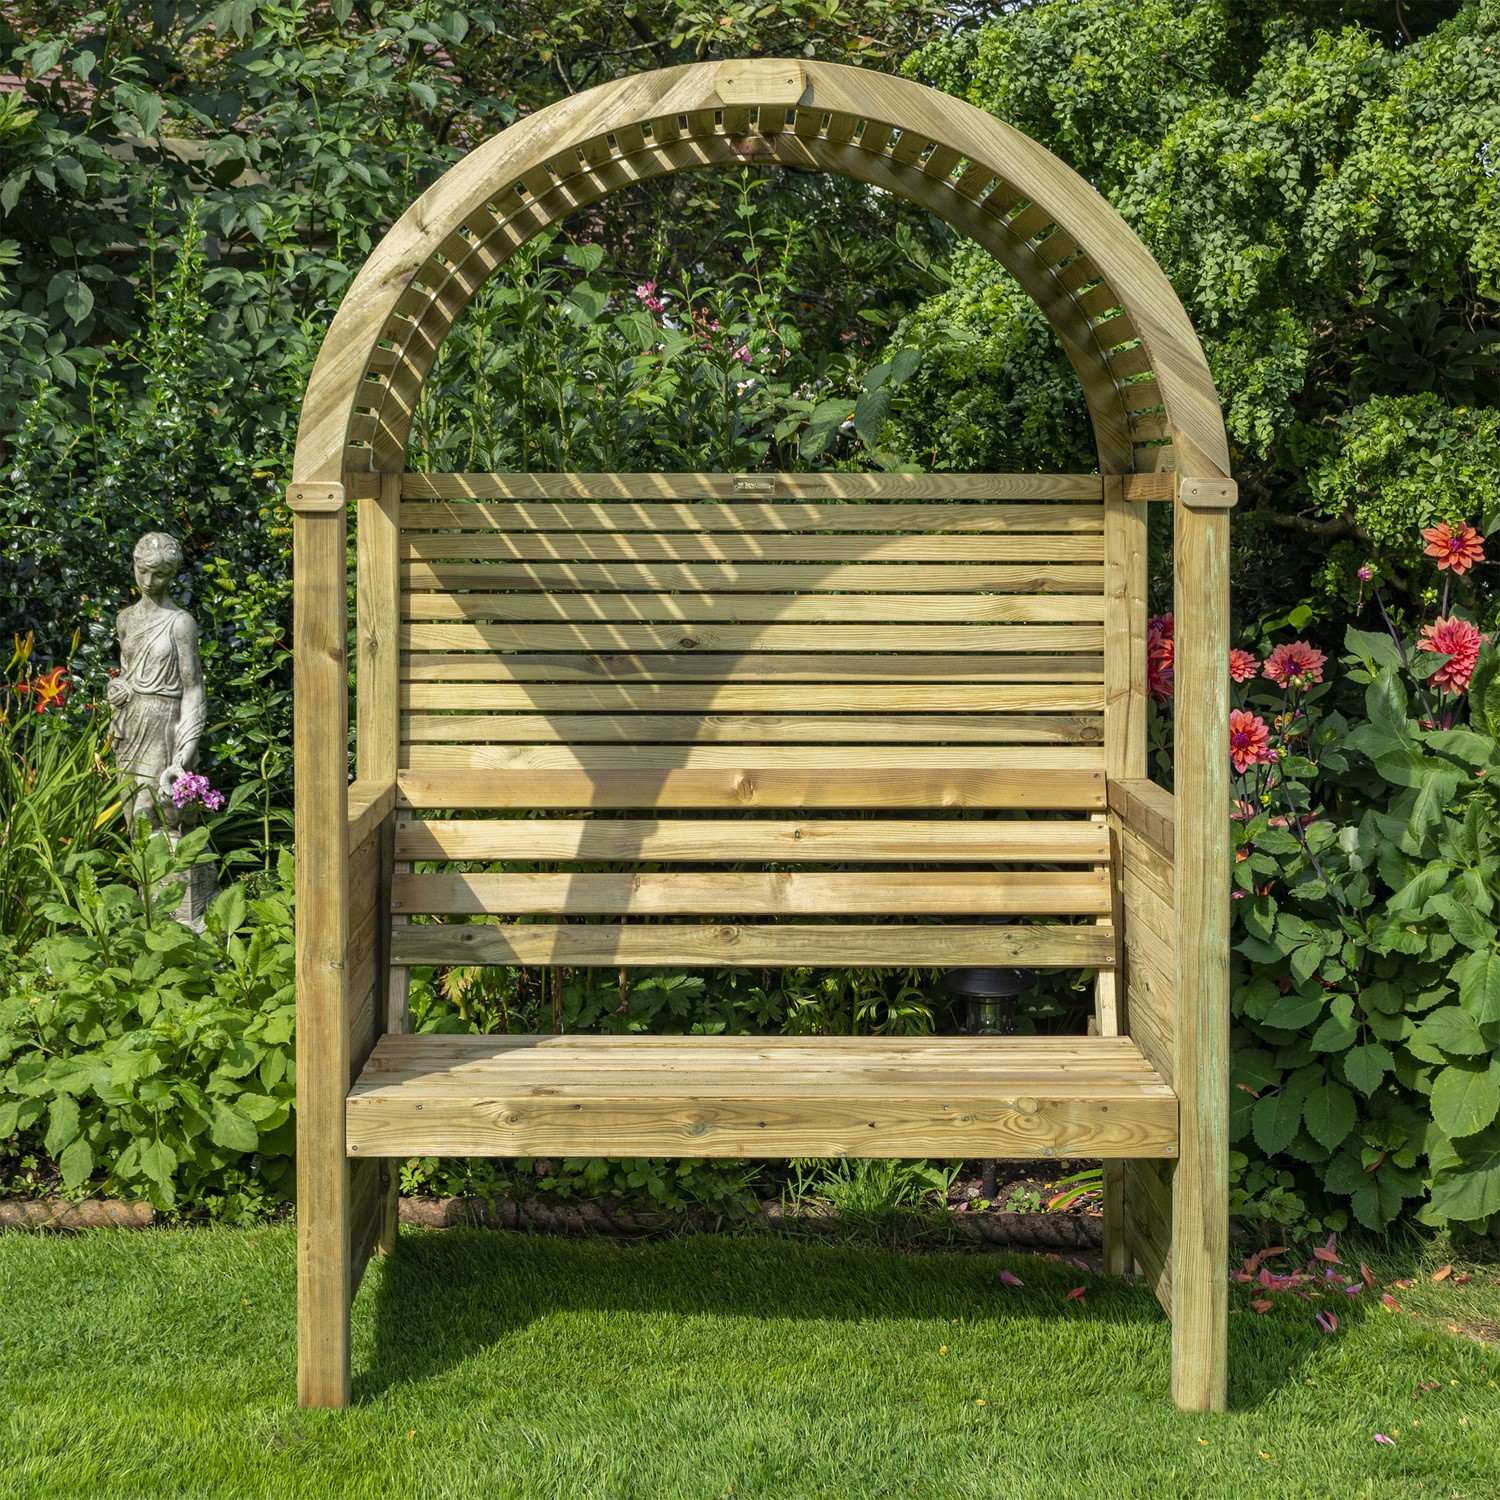 Read more about Rowlinson modena wooden garden arbour